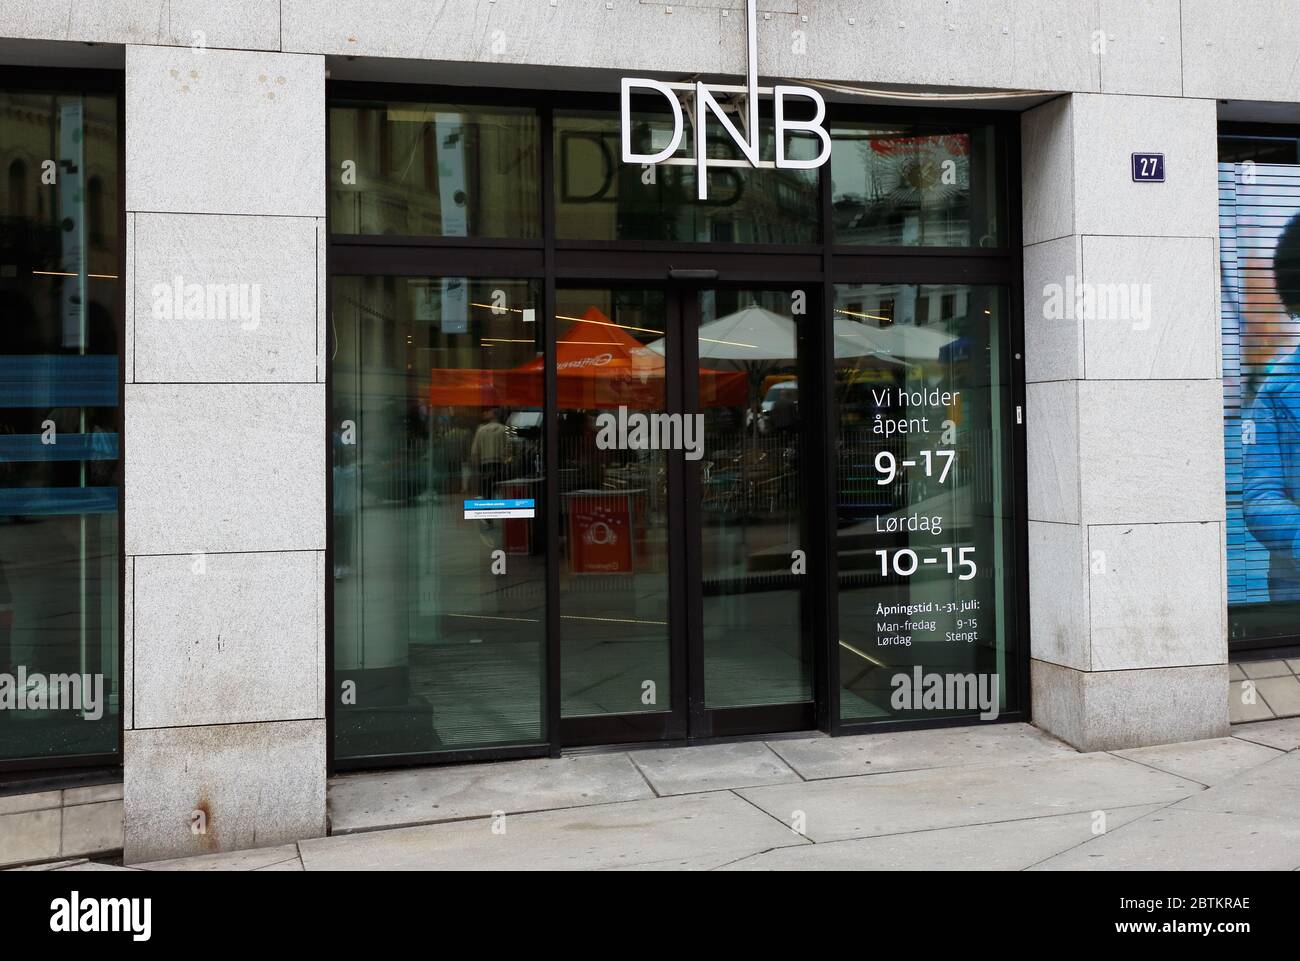 Oslo, Norway - June 20, 2019: Exterior view of the DNB bank office entrance at the 27 Karl Johans gate situated in the downtown district. Stock Photo